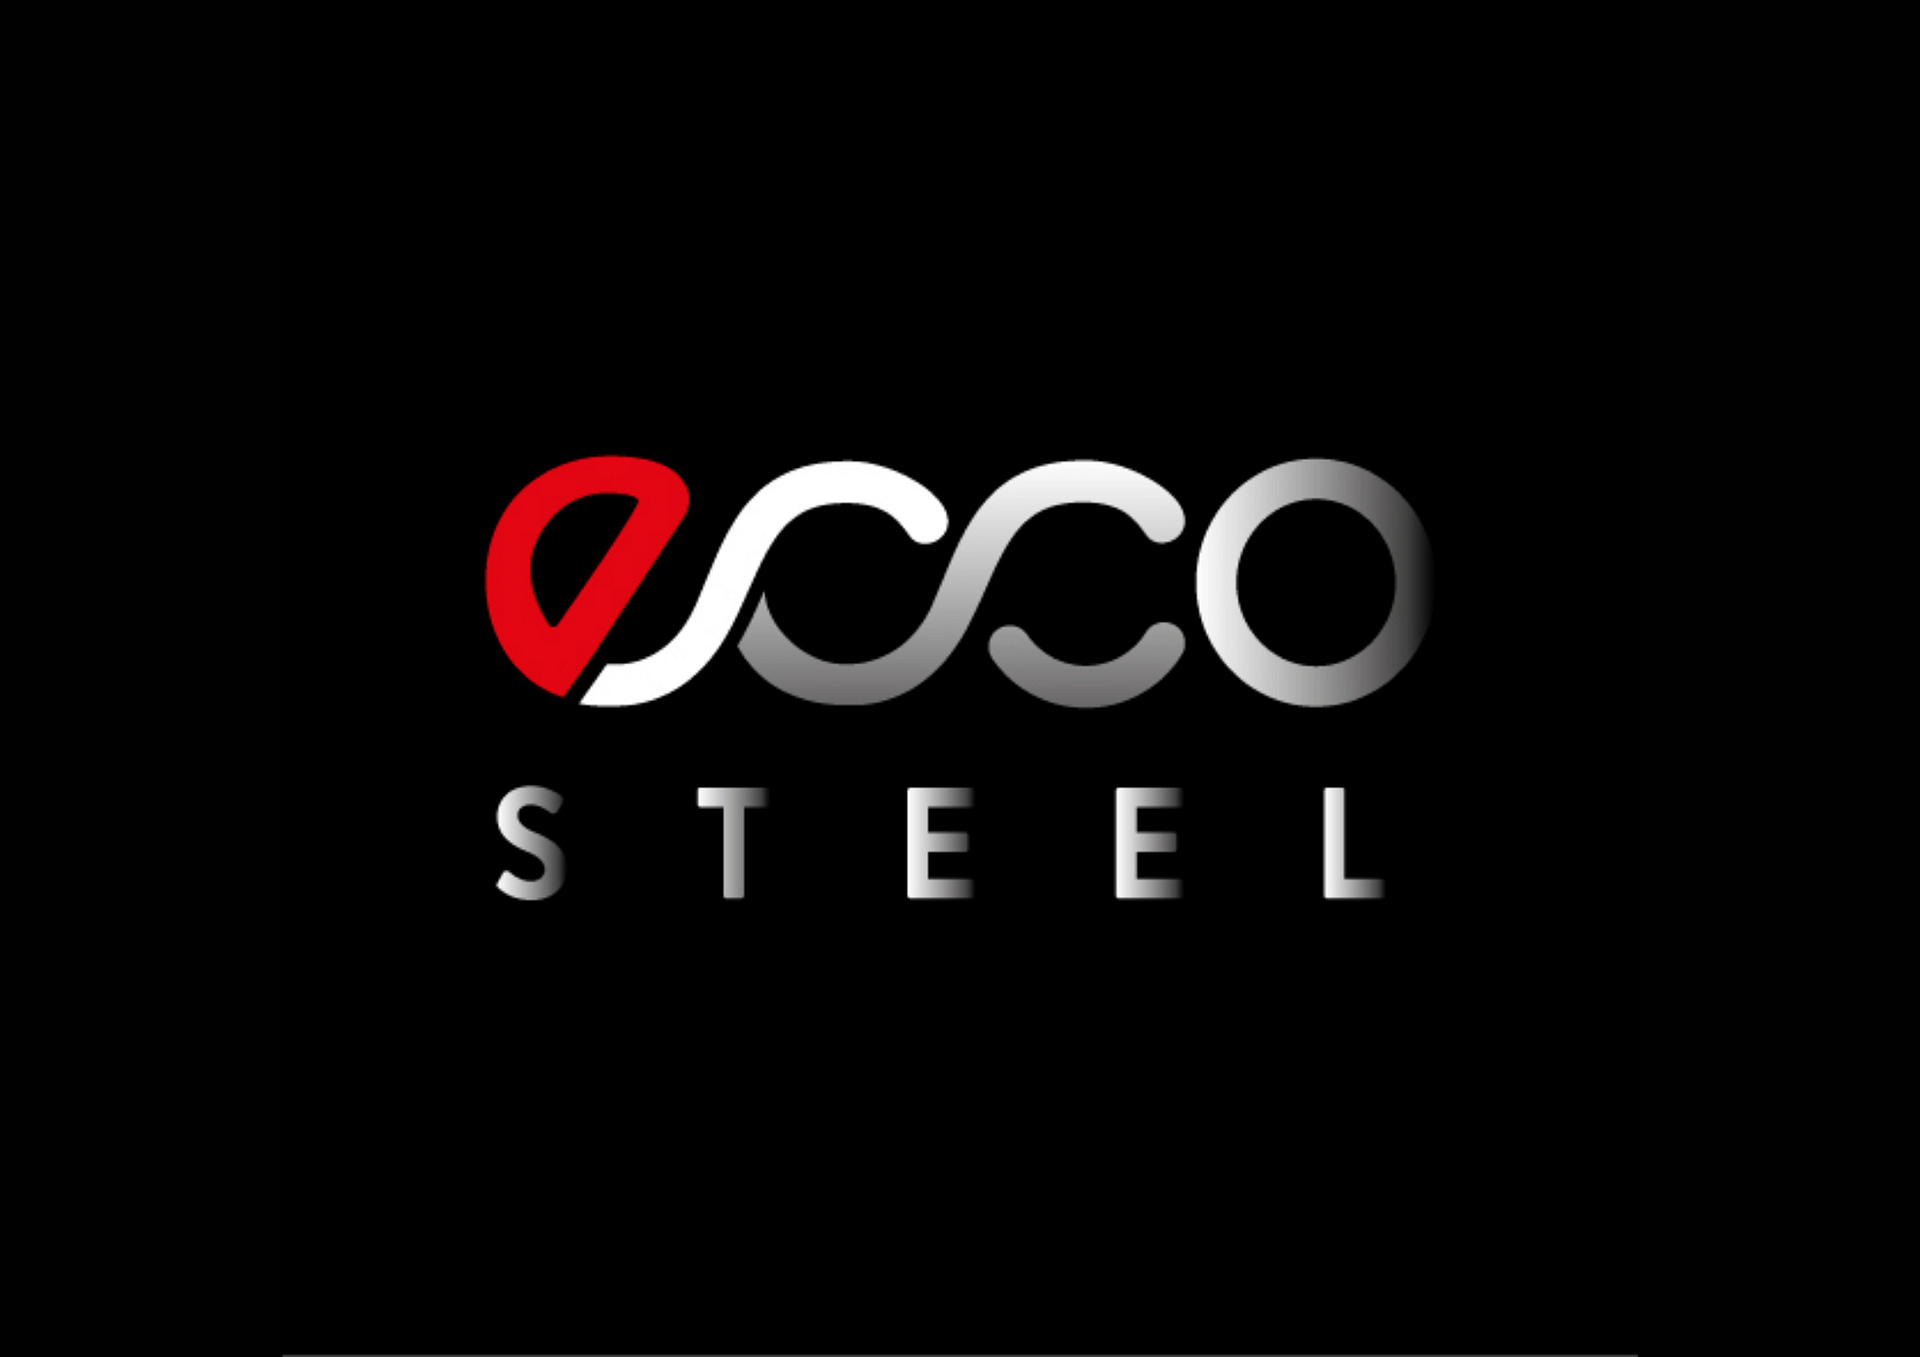 Reinforcement Steel Manufacturer and Supplier in Malaysia - ECCO Steel